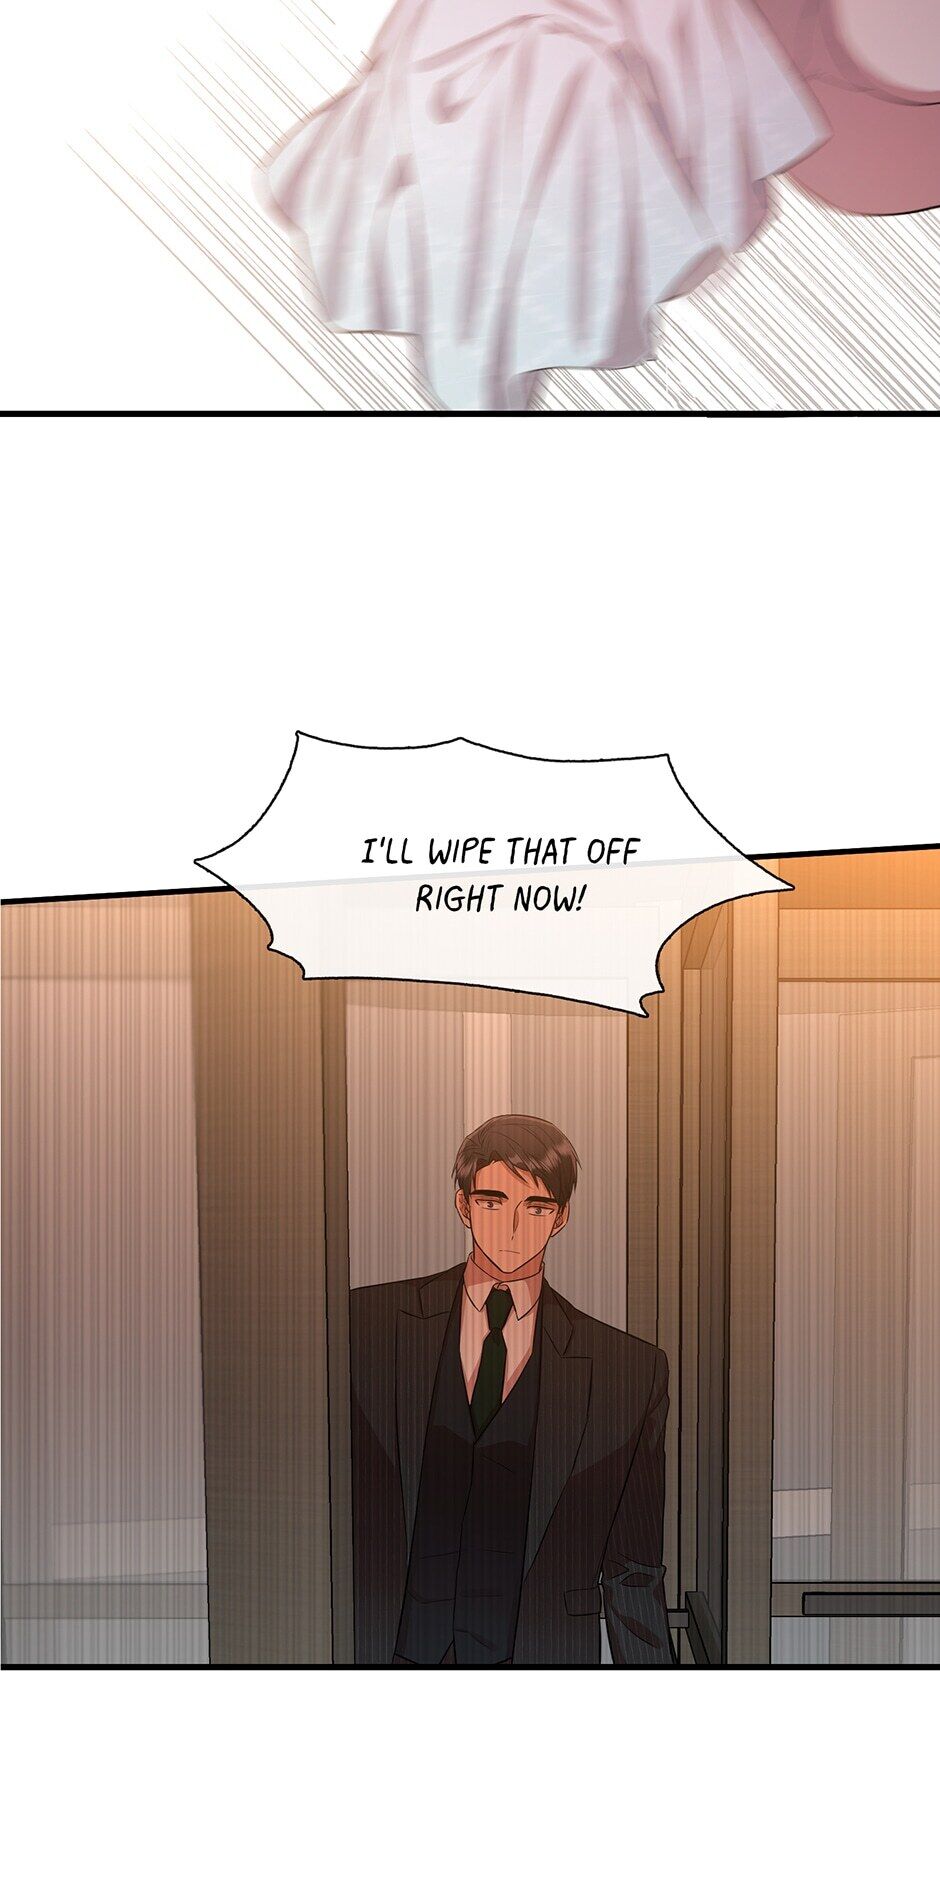 Office Romance Confidential chapter 21